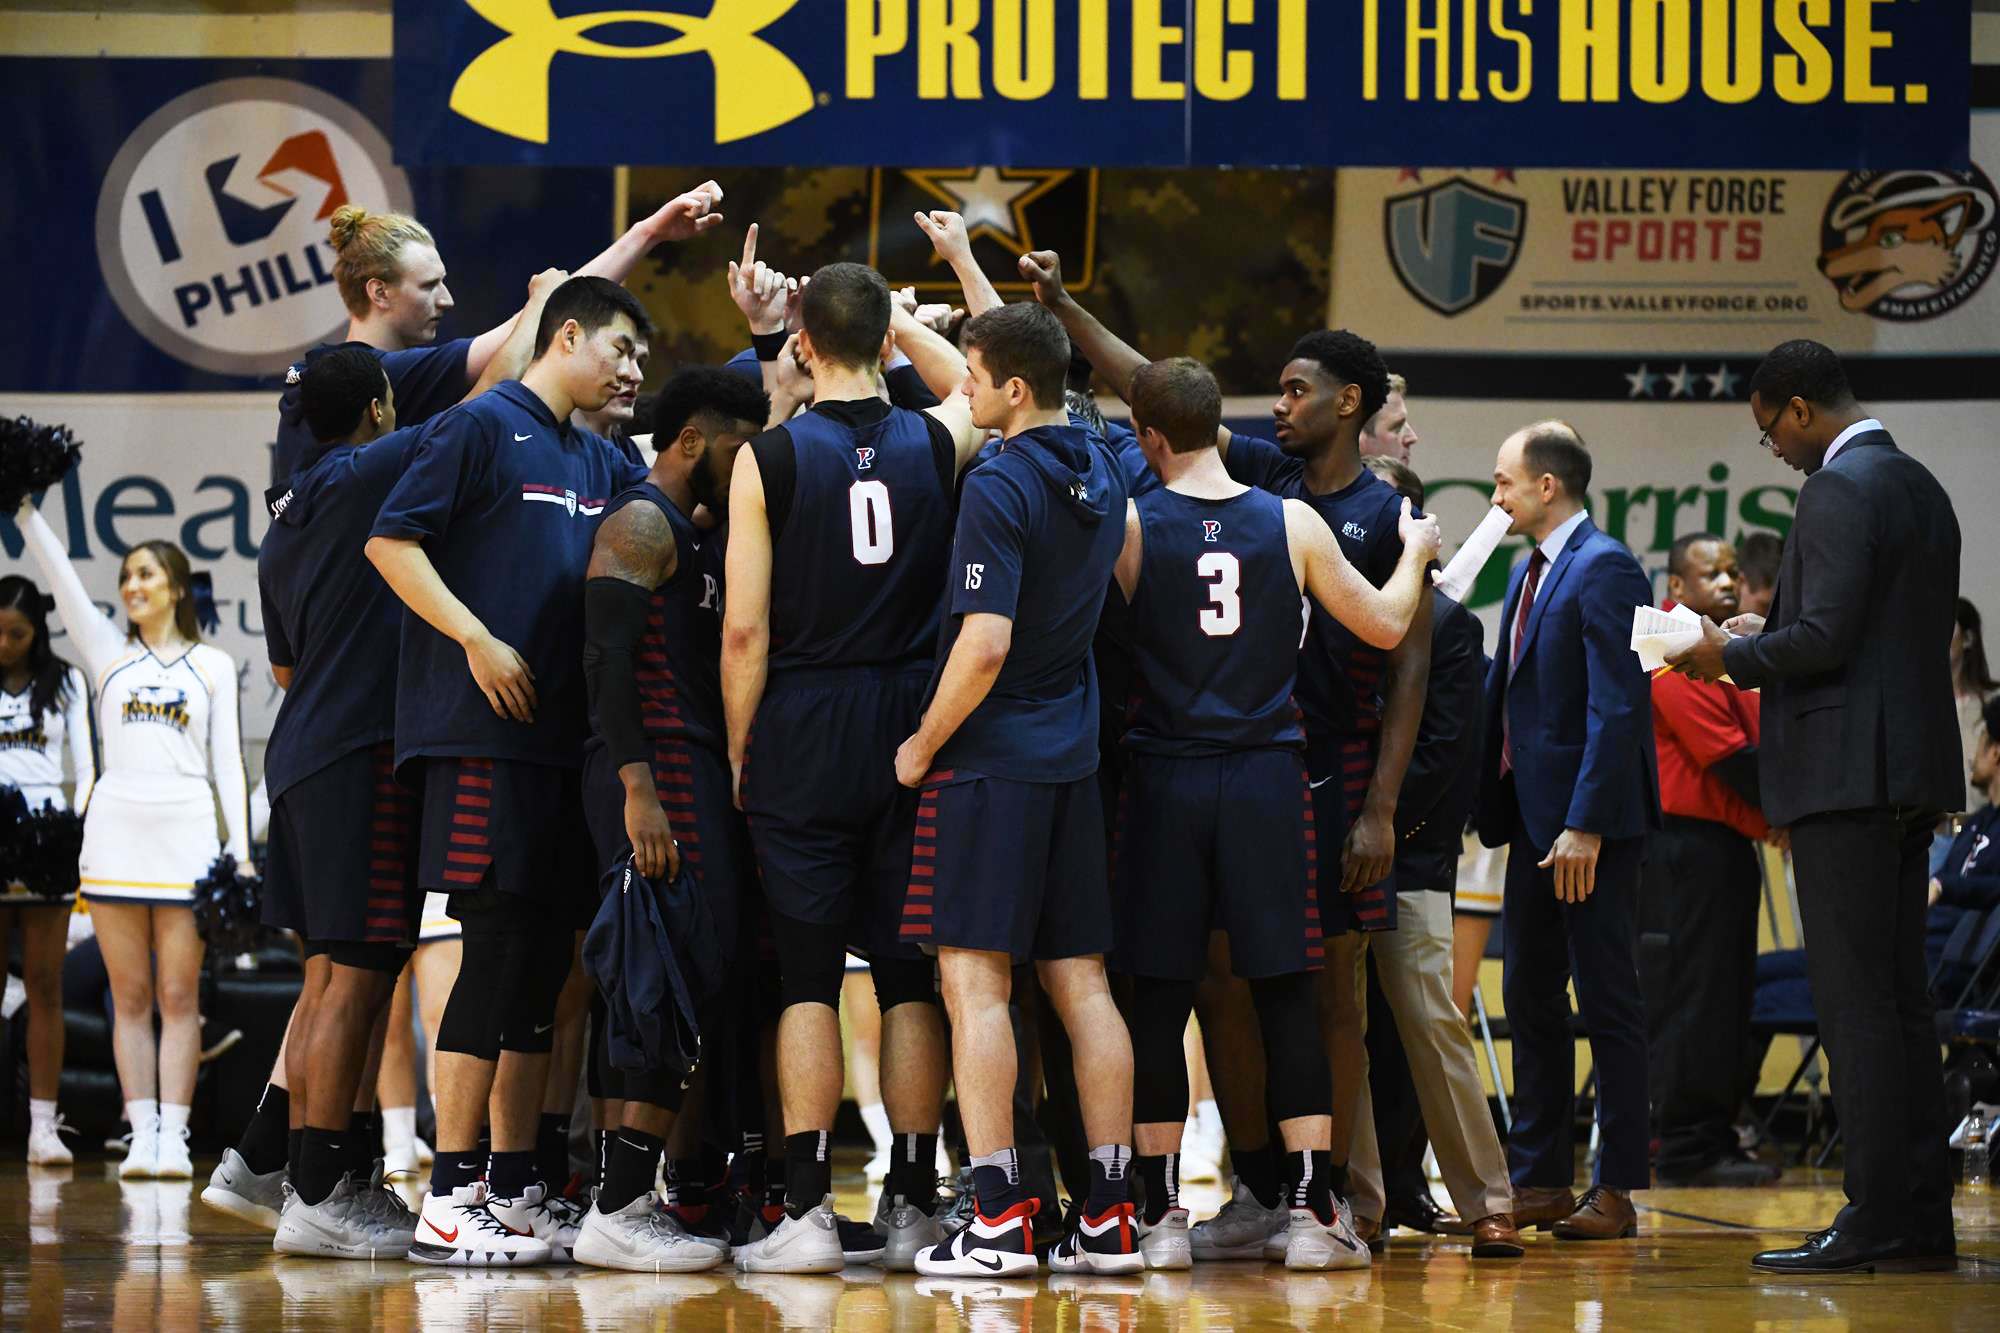 Members of the men's basketball team put their hands in circle during a huddle.